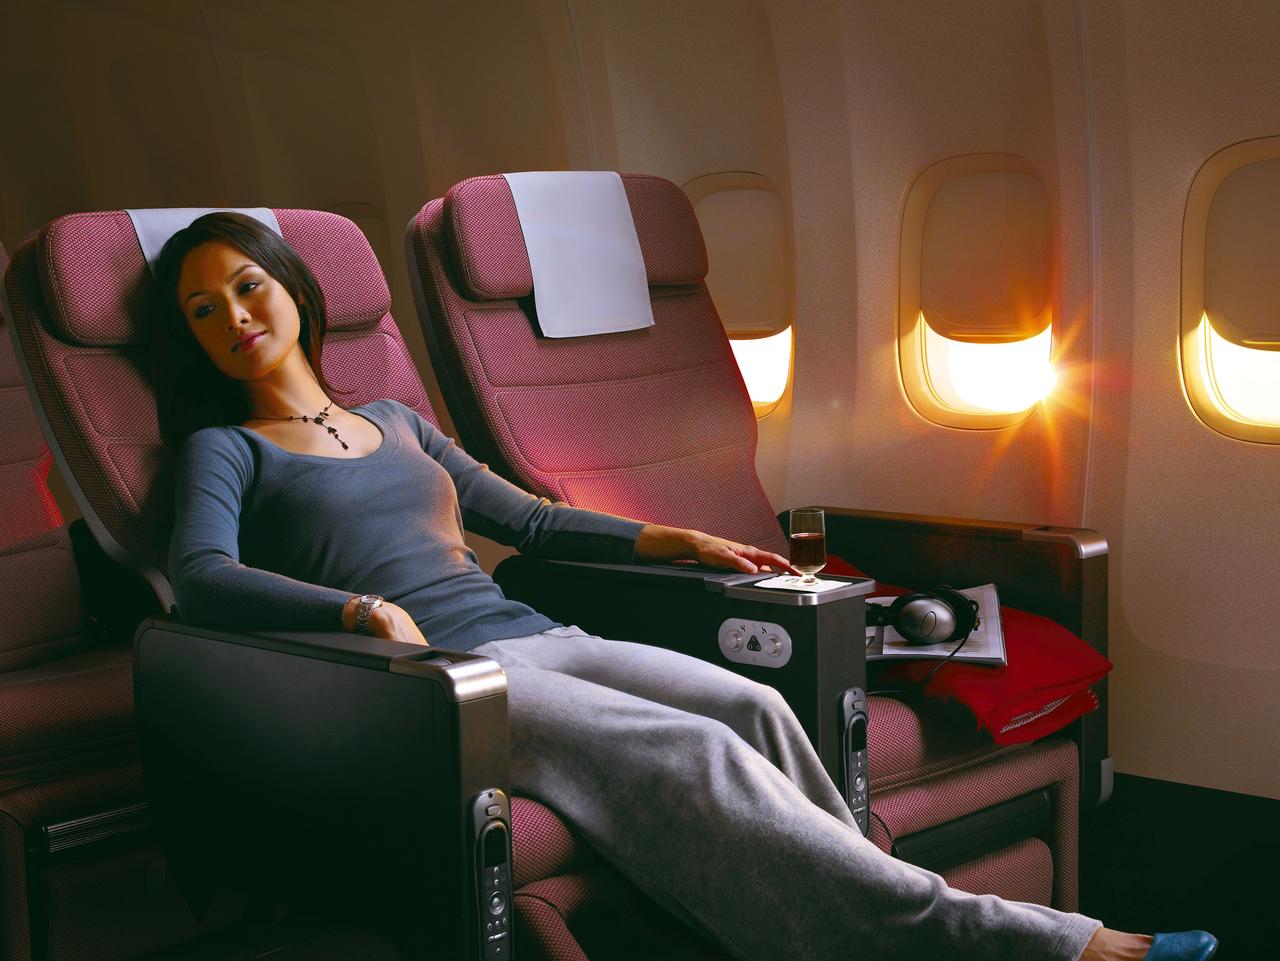 The new premium economy class will have wider seats and more legroom.